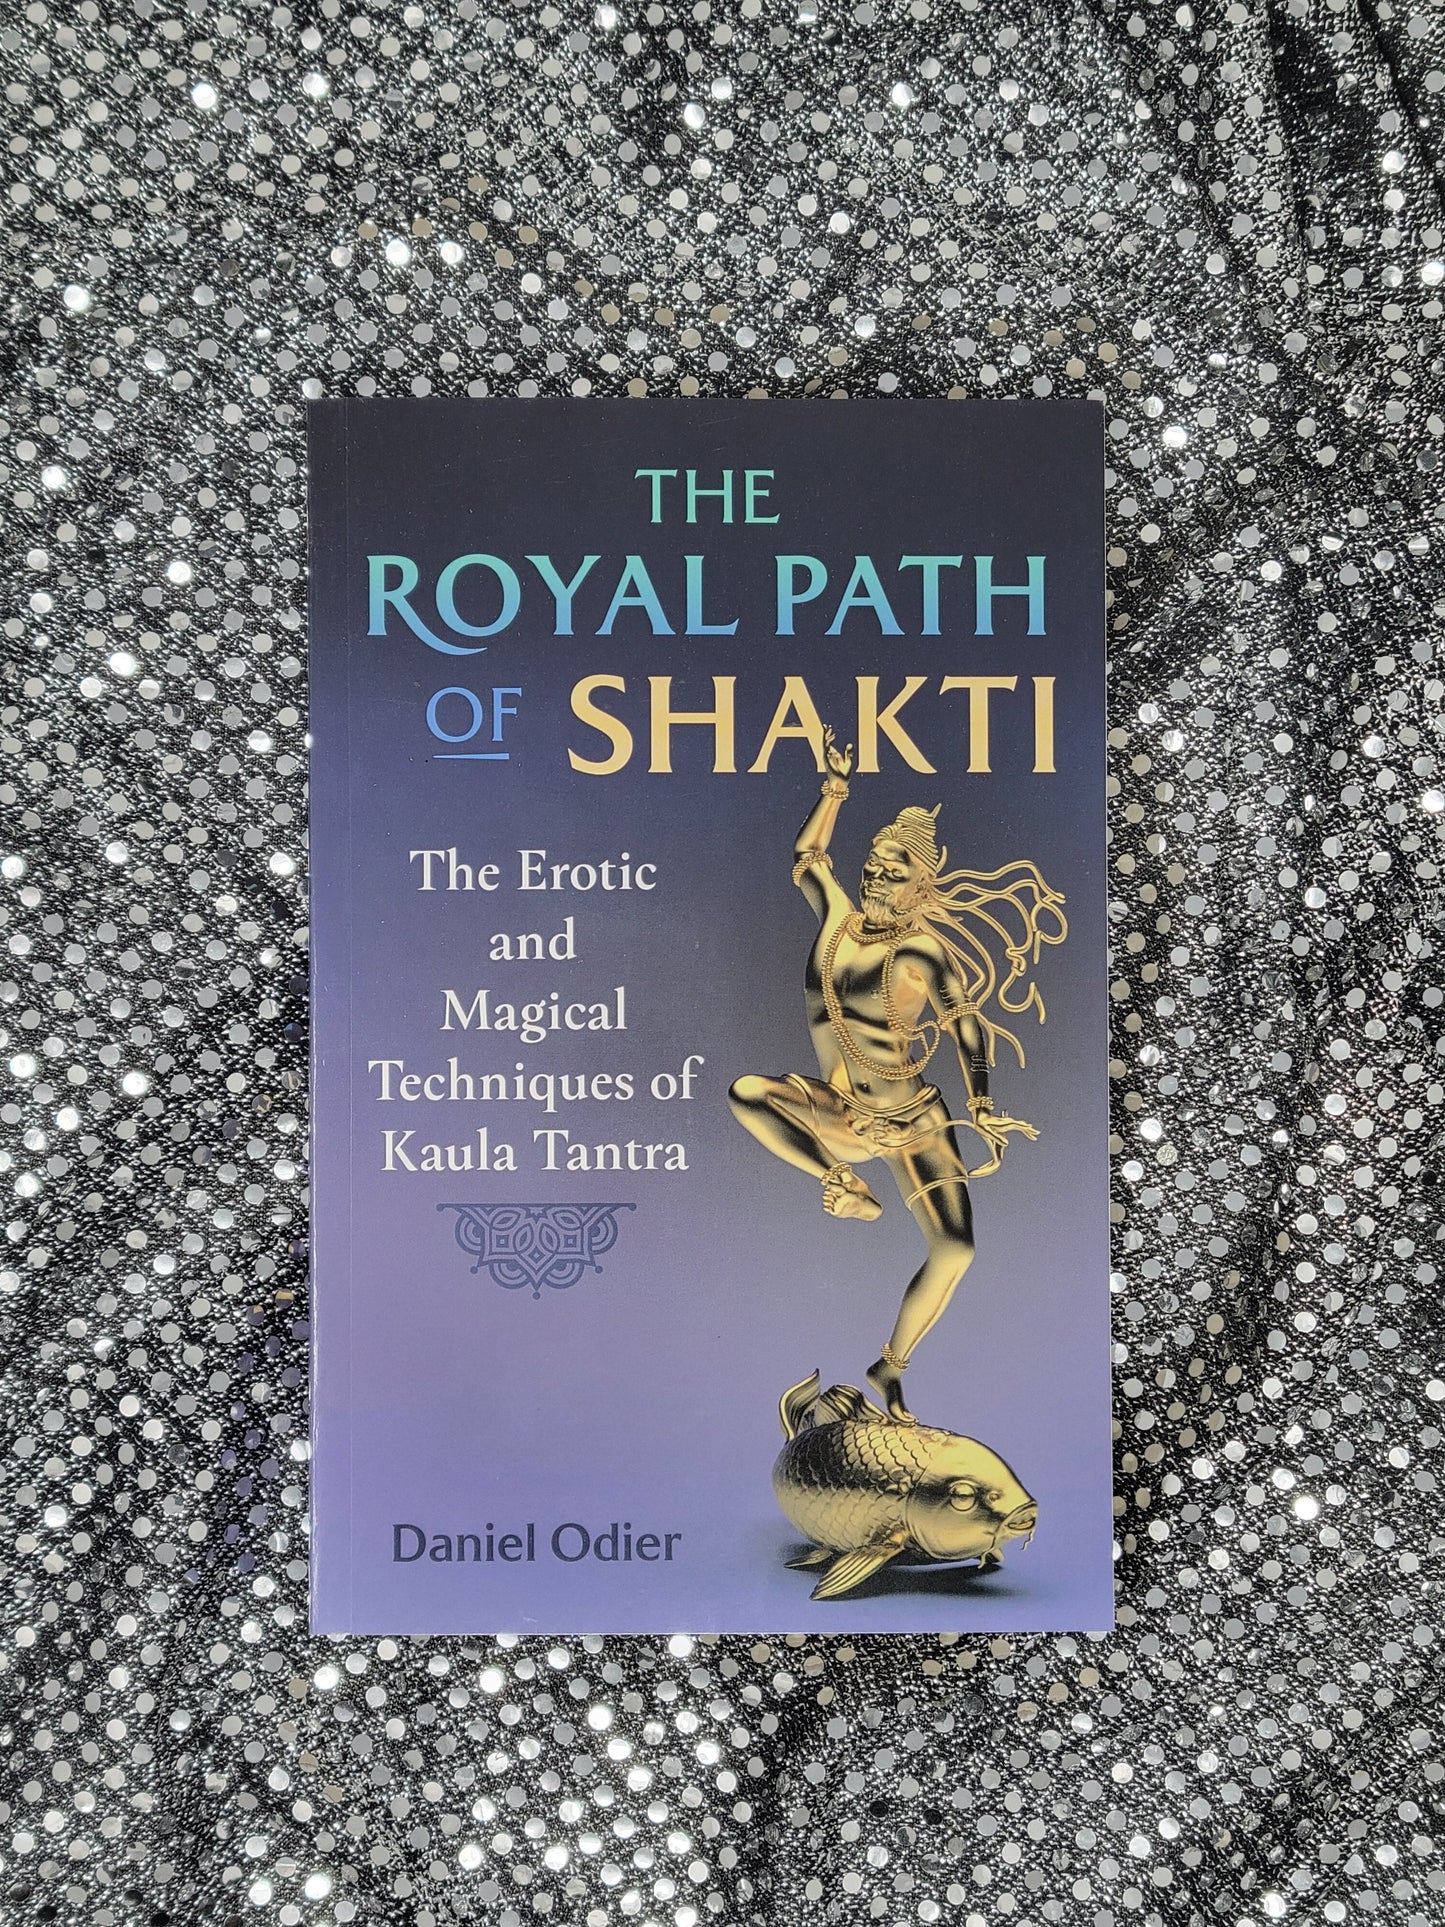 The Royal Path of Shakti The Erotic and Magical Techniques of Kaula Tantra - By Daniel Odier